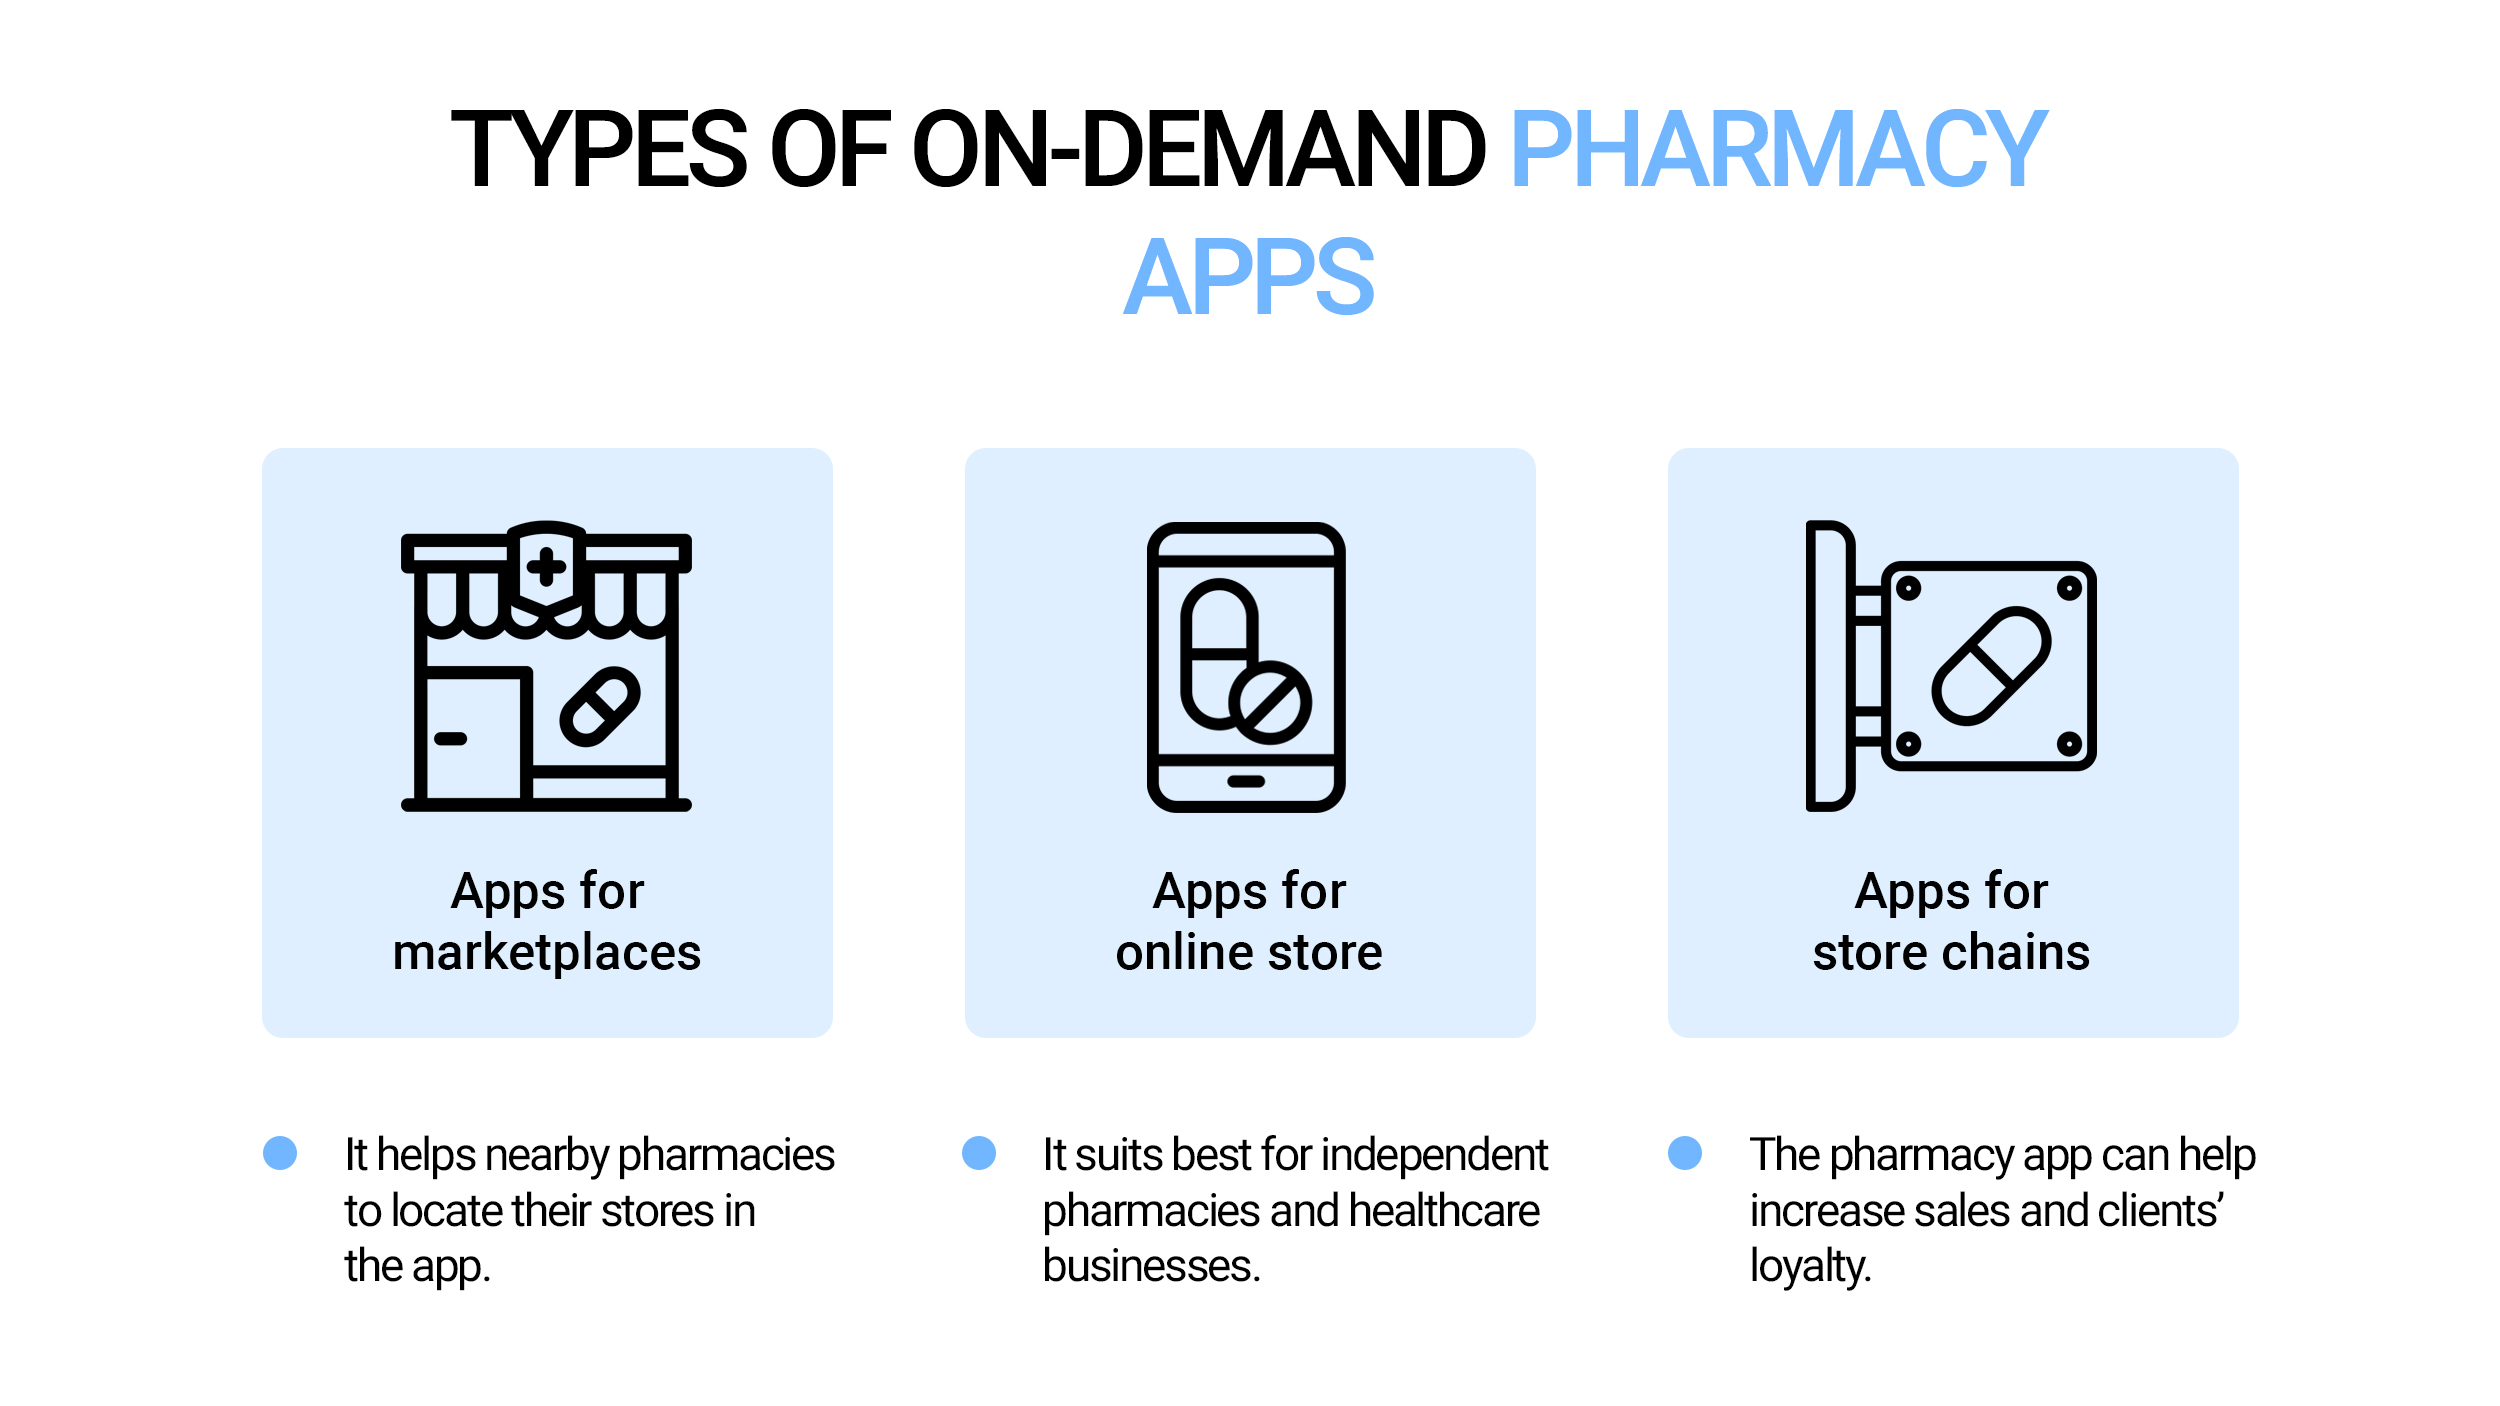 Types of on-demand pharmacy apps